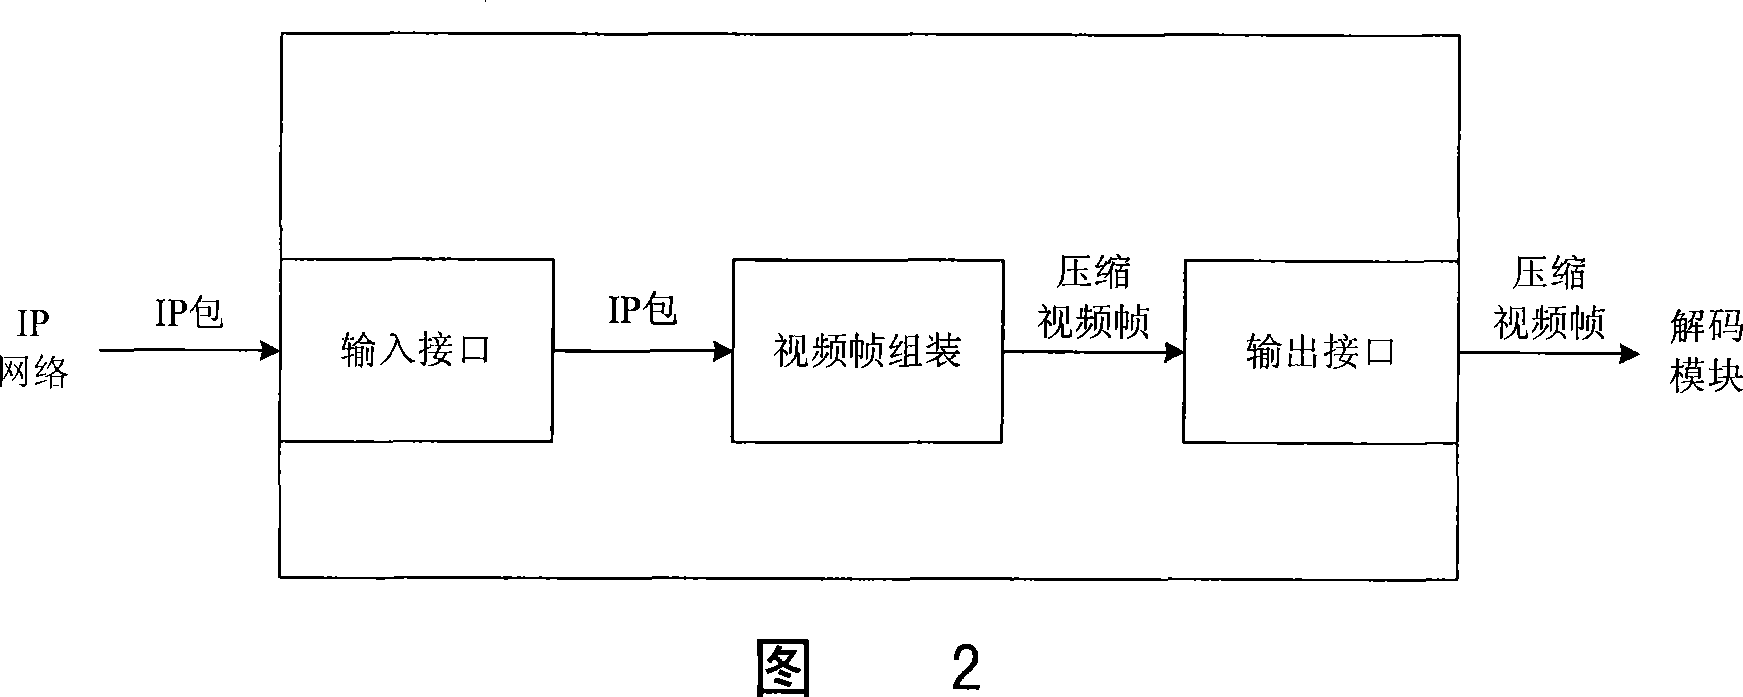 Network flow media player and method for support multi-viewpoint vedio composition